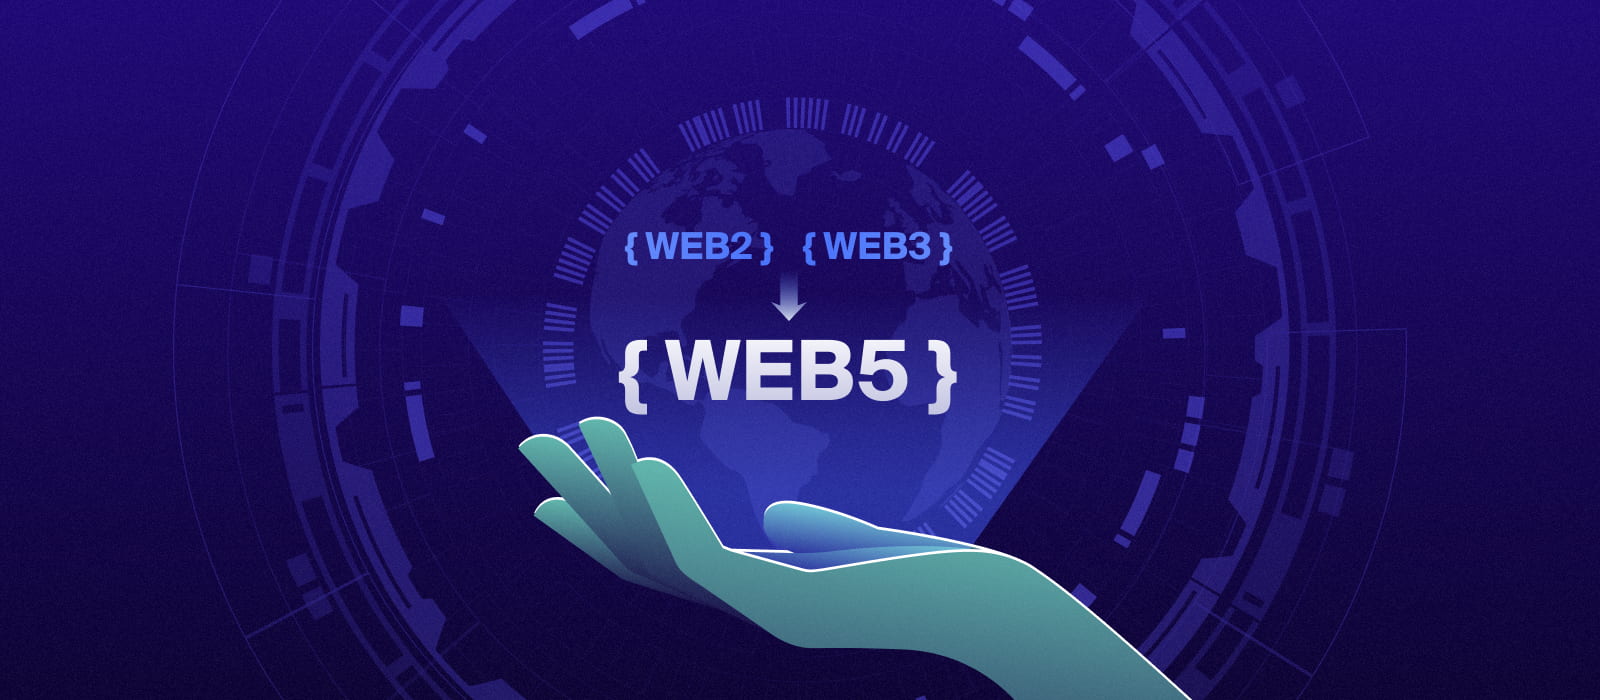 Web5 as a combination of Web3 and Web2